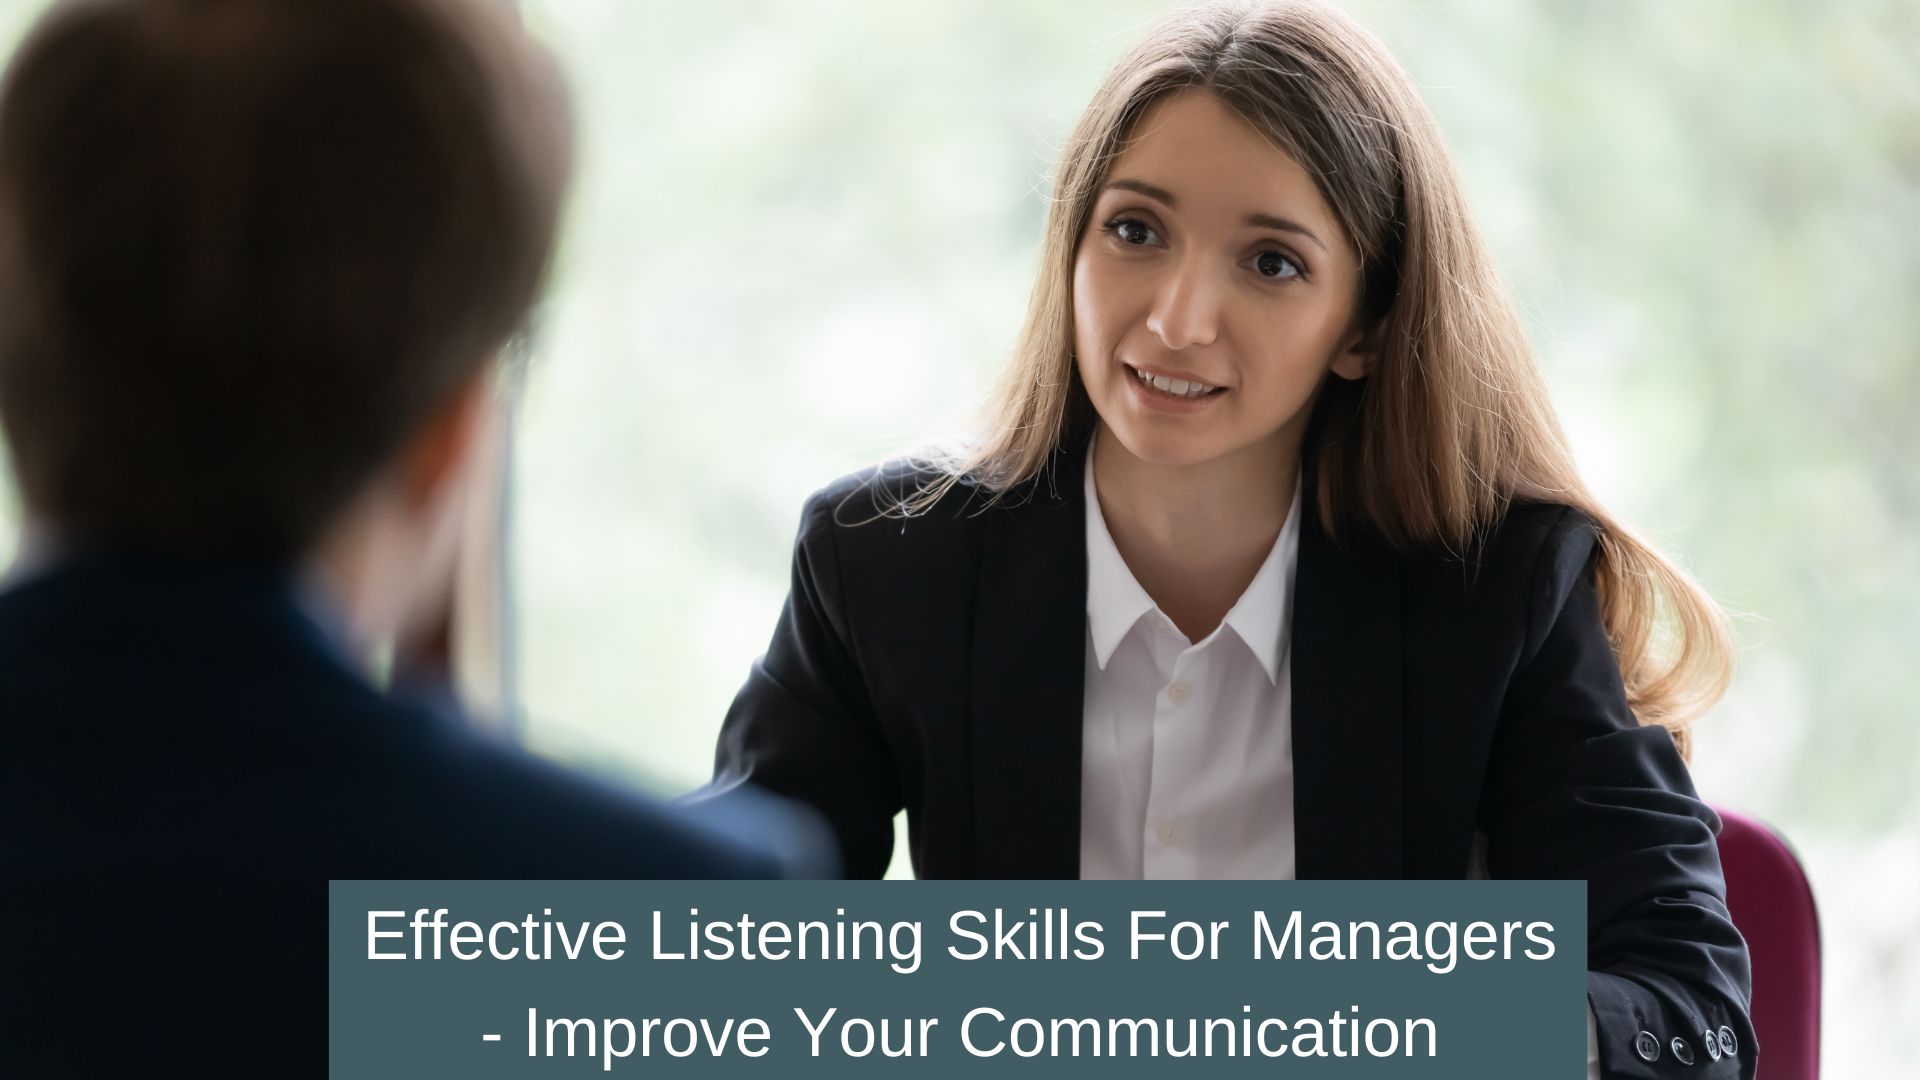 Effective Listening Skills for managers - improve your communication